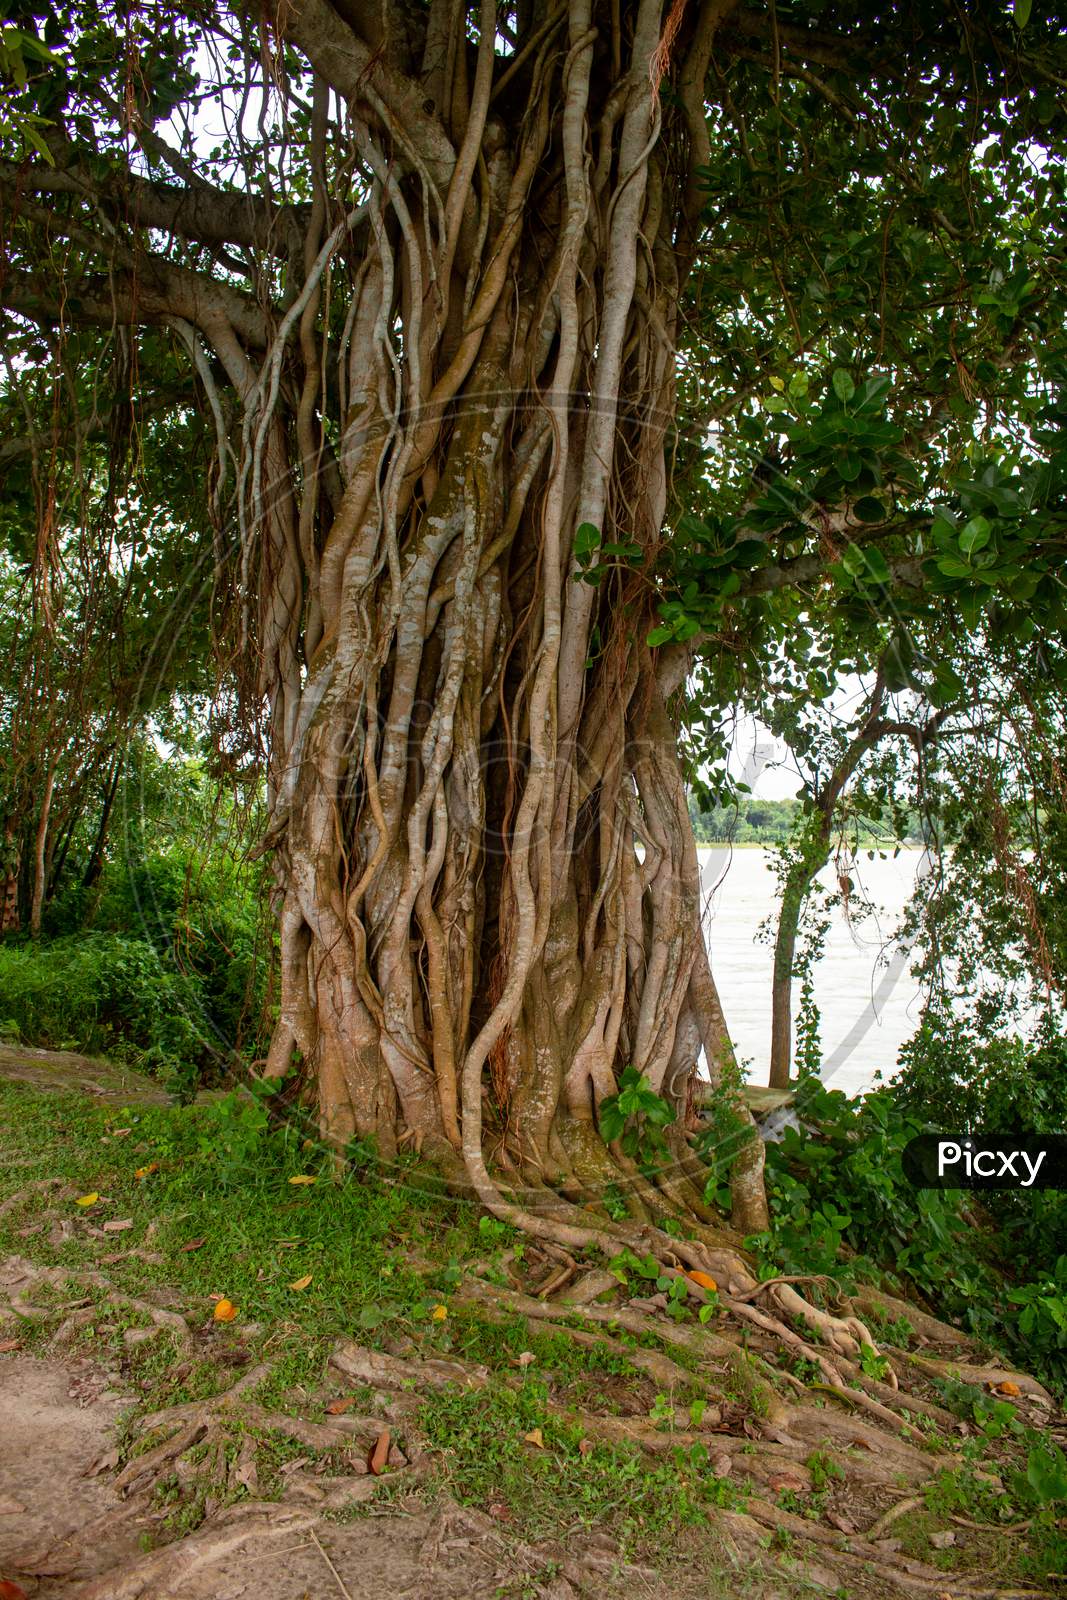 Picture Of The Roots Of A Large Banyan Tree Along The River. A Banyan Tree In Bangladesh (Ficus Benhalensis).